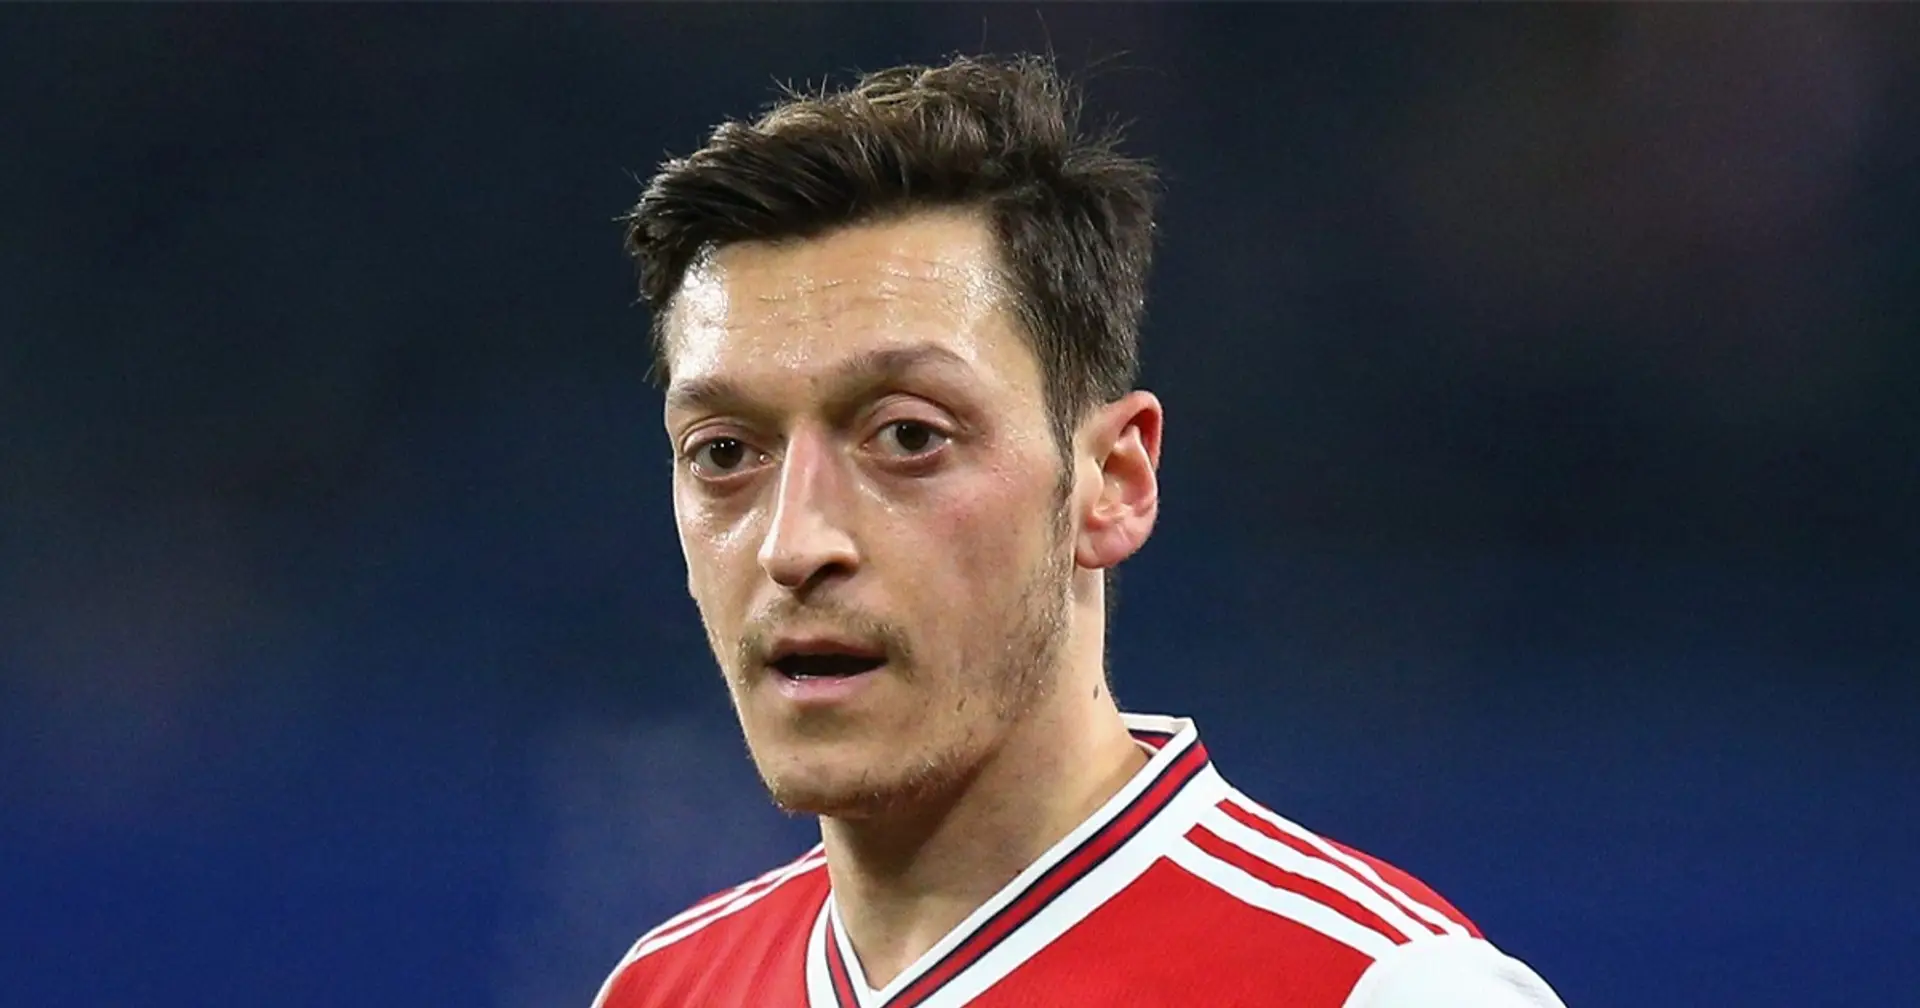 Mesut Ozil cut from Arsenal's 25-man squad for Premier League (reliability: 5 stars)